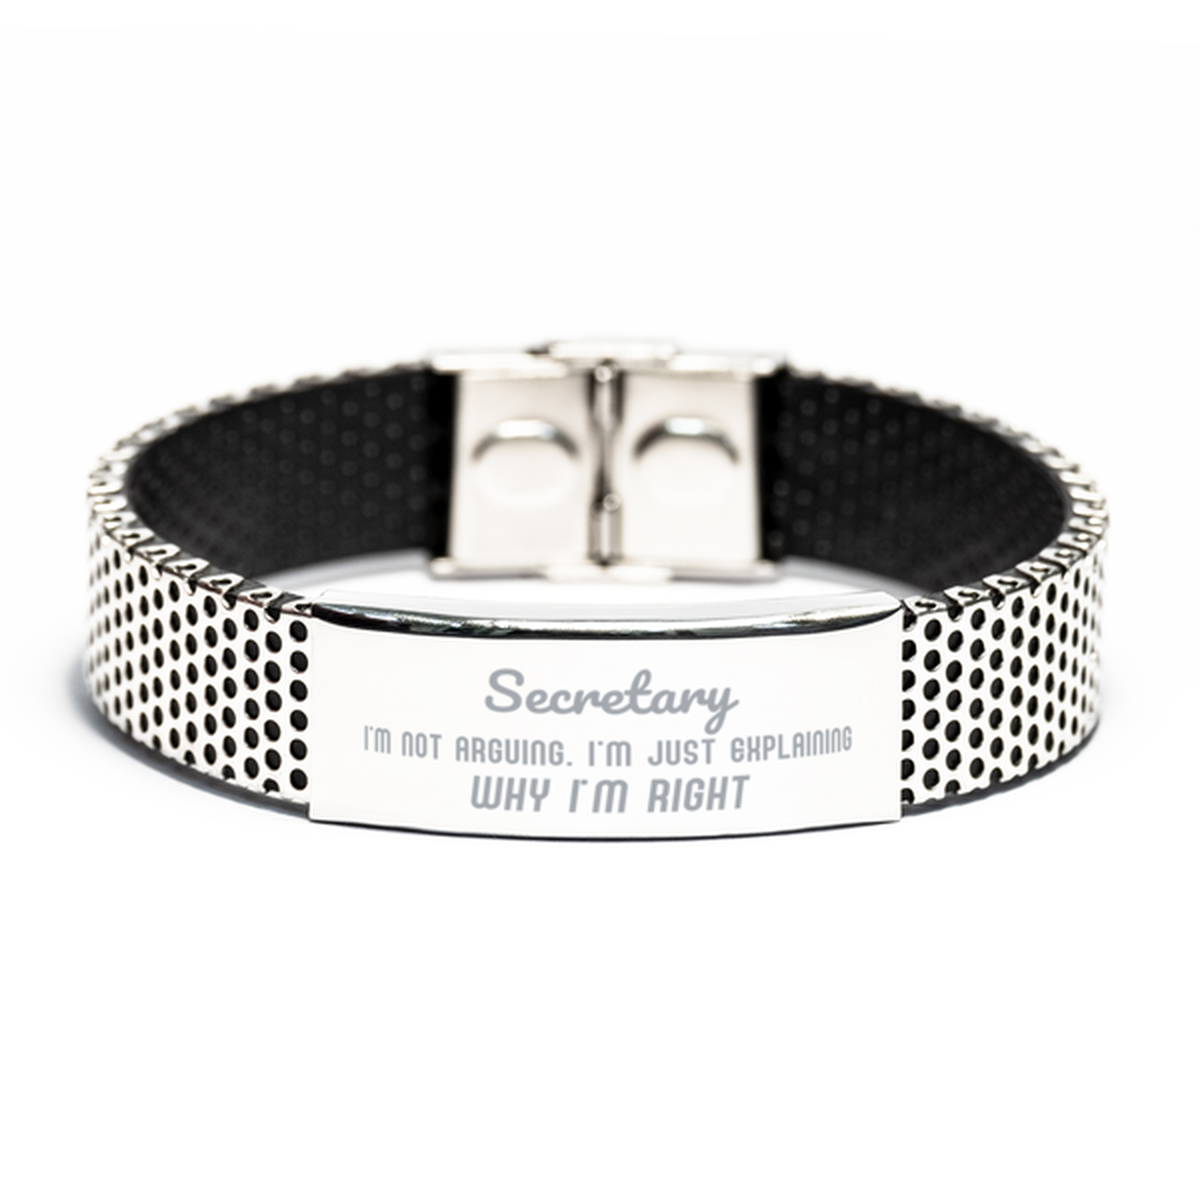 Secretary I'm not Arguing. I'm Just Explaining Why I'm RIGHT Stainless Steel Bracelet, Funny Saying Quote Secretary Gifts For Secretary Graduation Birthday Christmas Gifts for Men Women Coworker